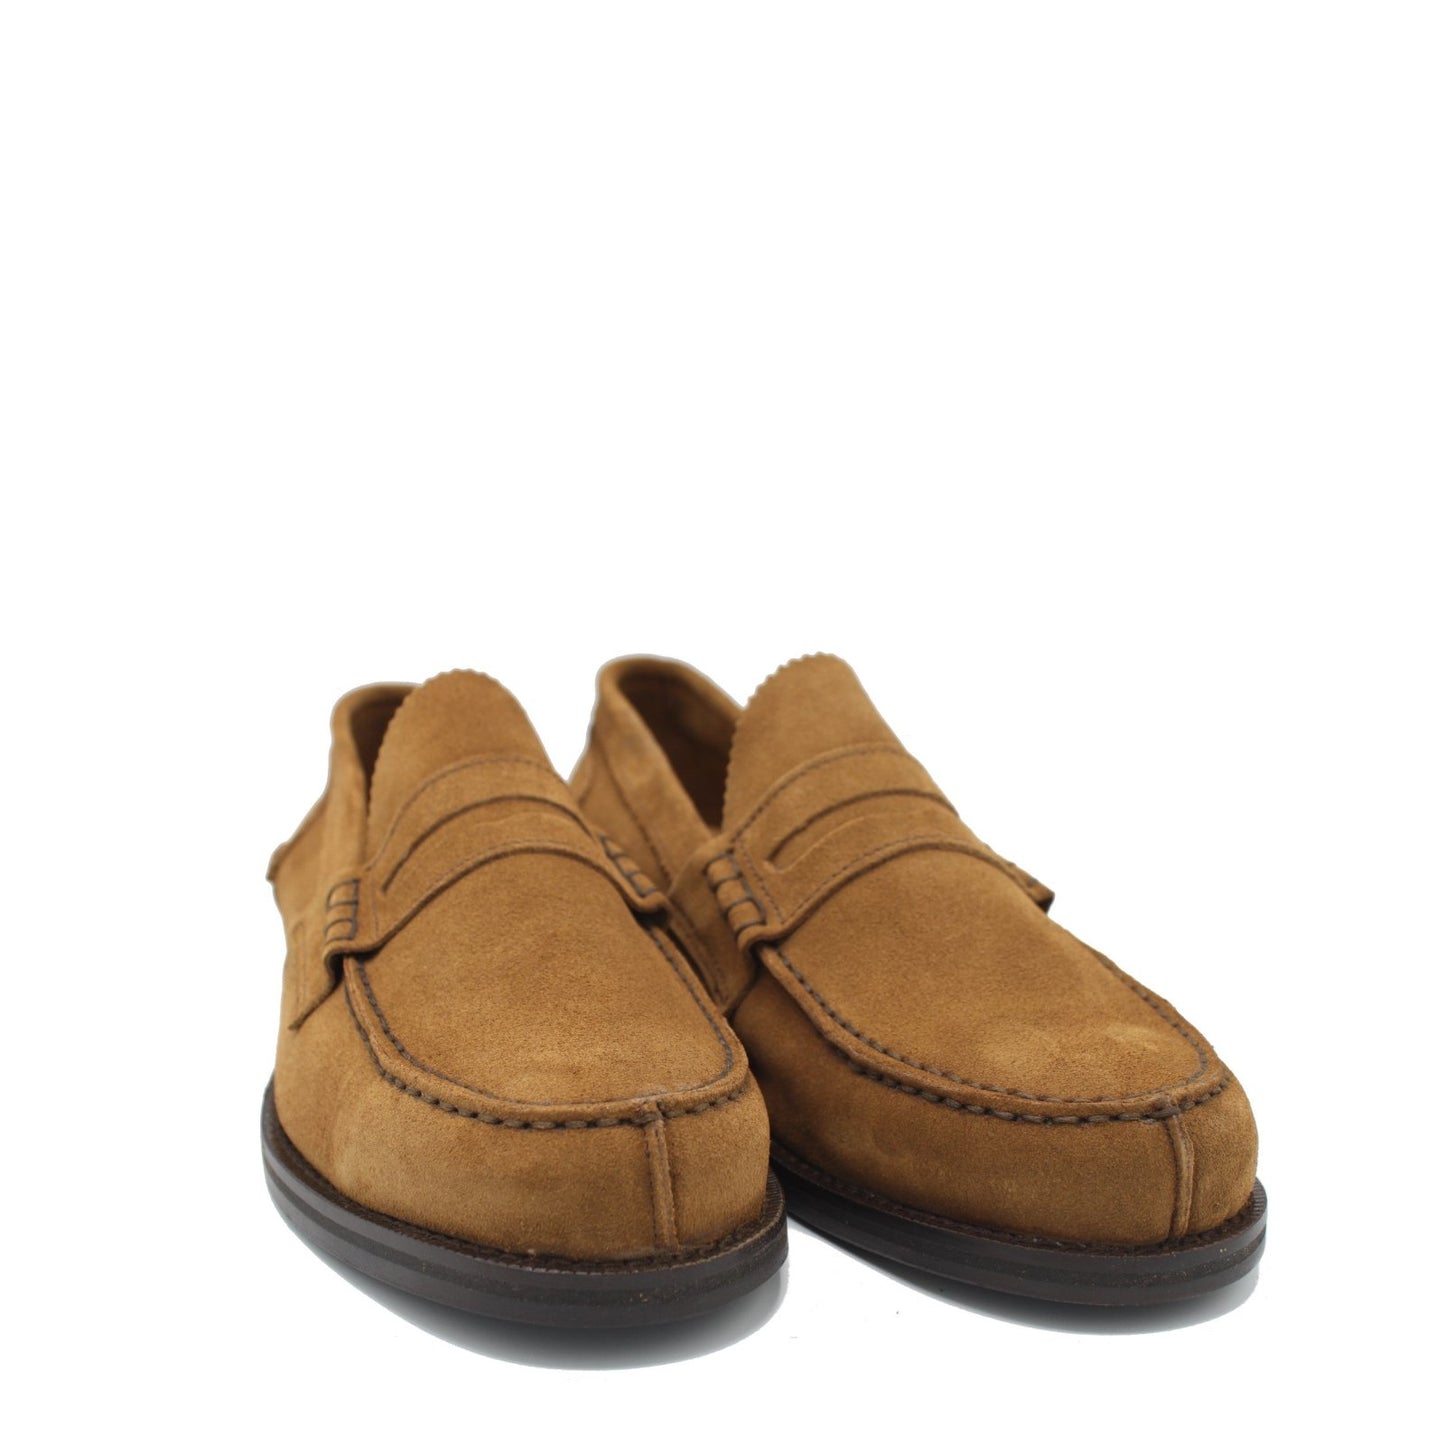 PENNY LOAFER MARRACA SUEDE - Saxone of Scotland